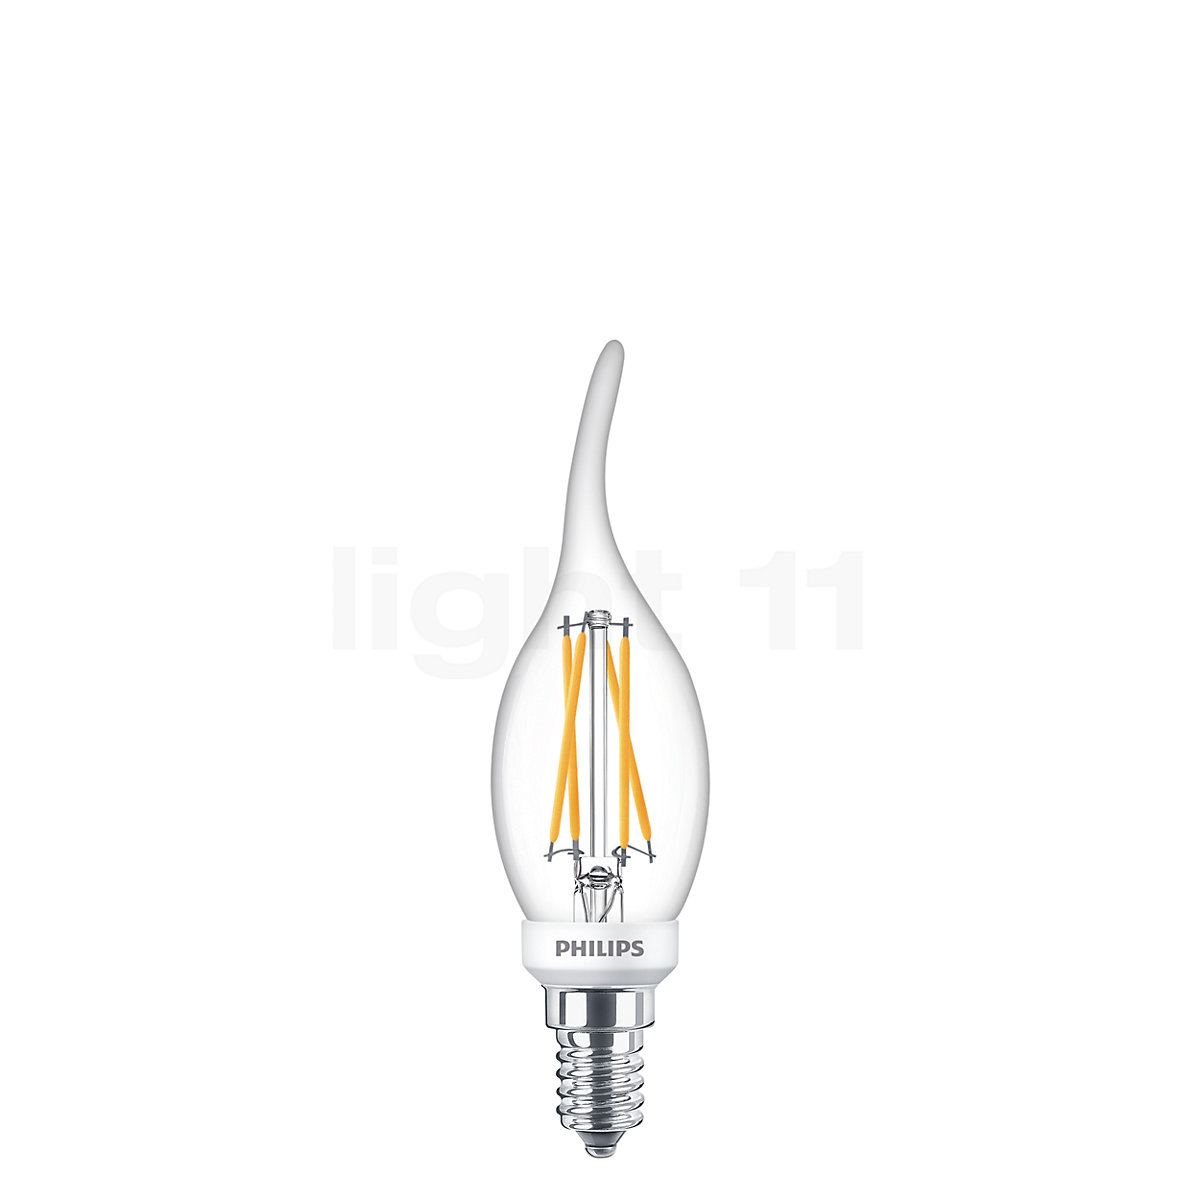 100 x Lampe à incandescence C35 - 6W - LED - E14 - dimmable - 2700K (b 